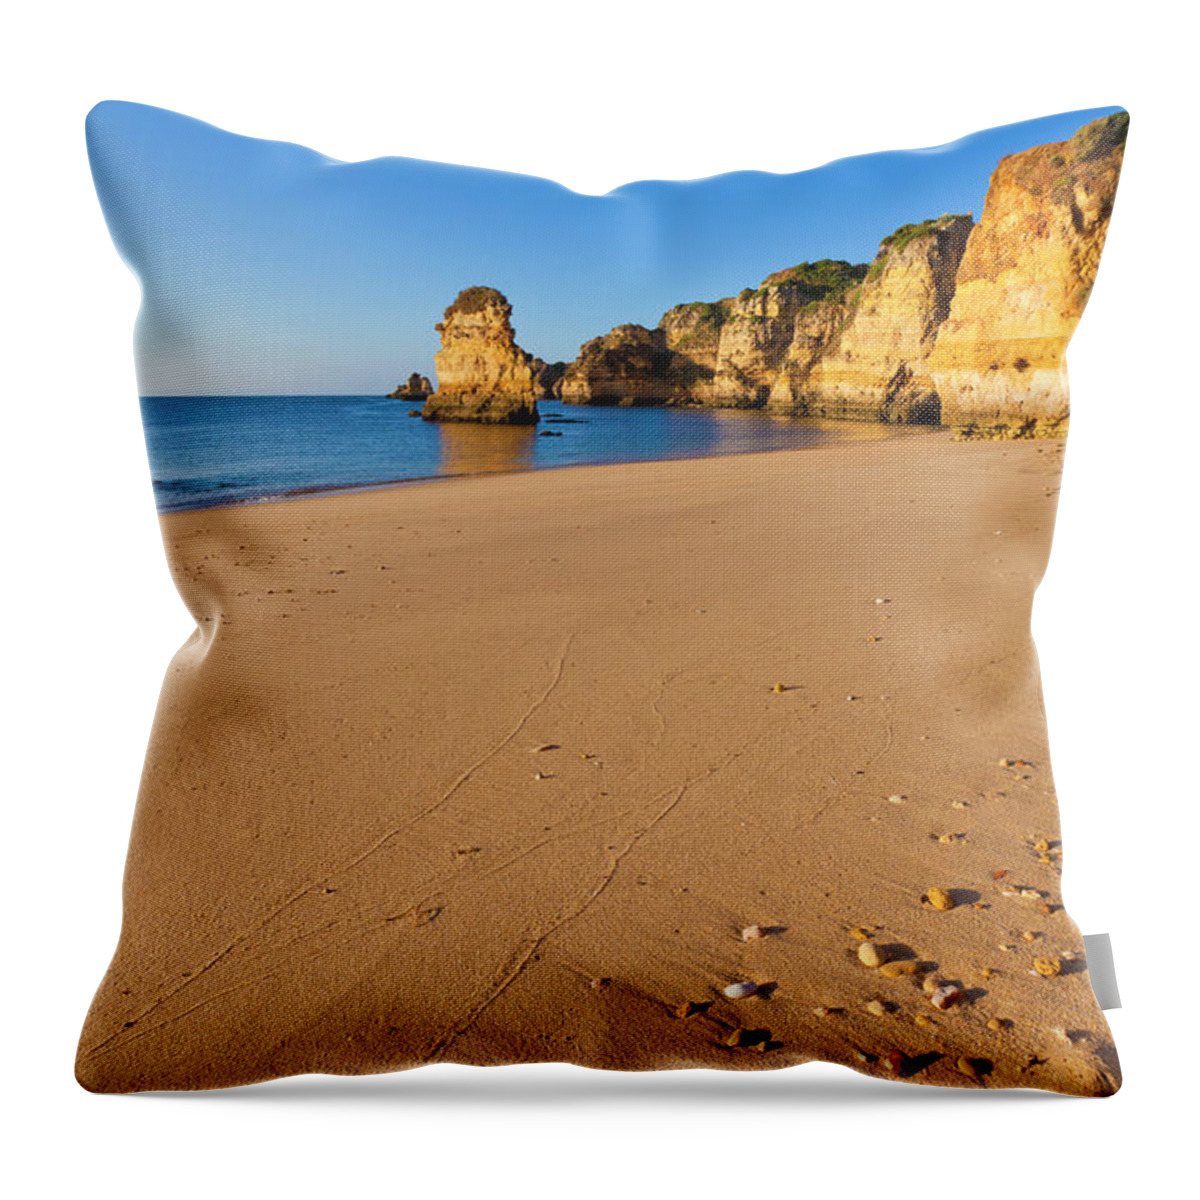 Algarve Throw Pillow featuring the photograph Dona Ana Beach In Lagos, Algarve #1 by Werner Dieterich